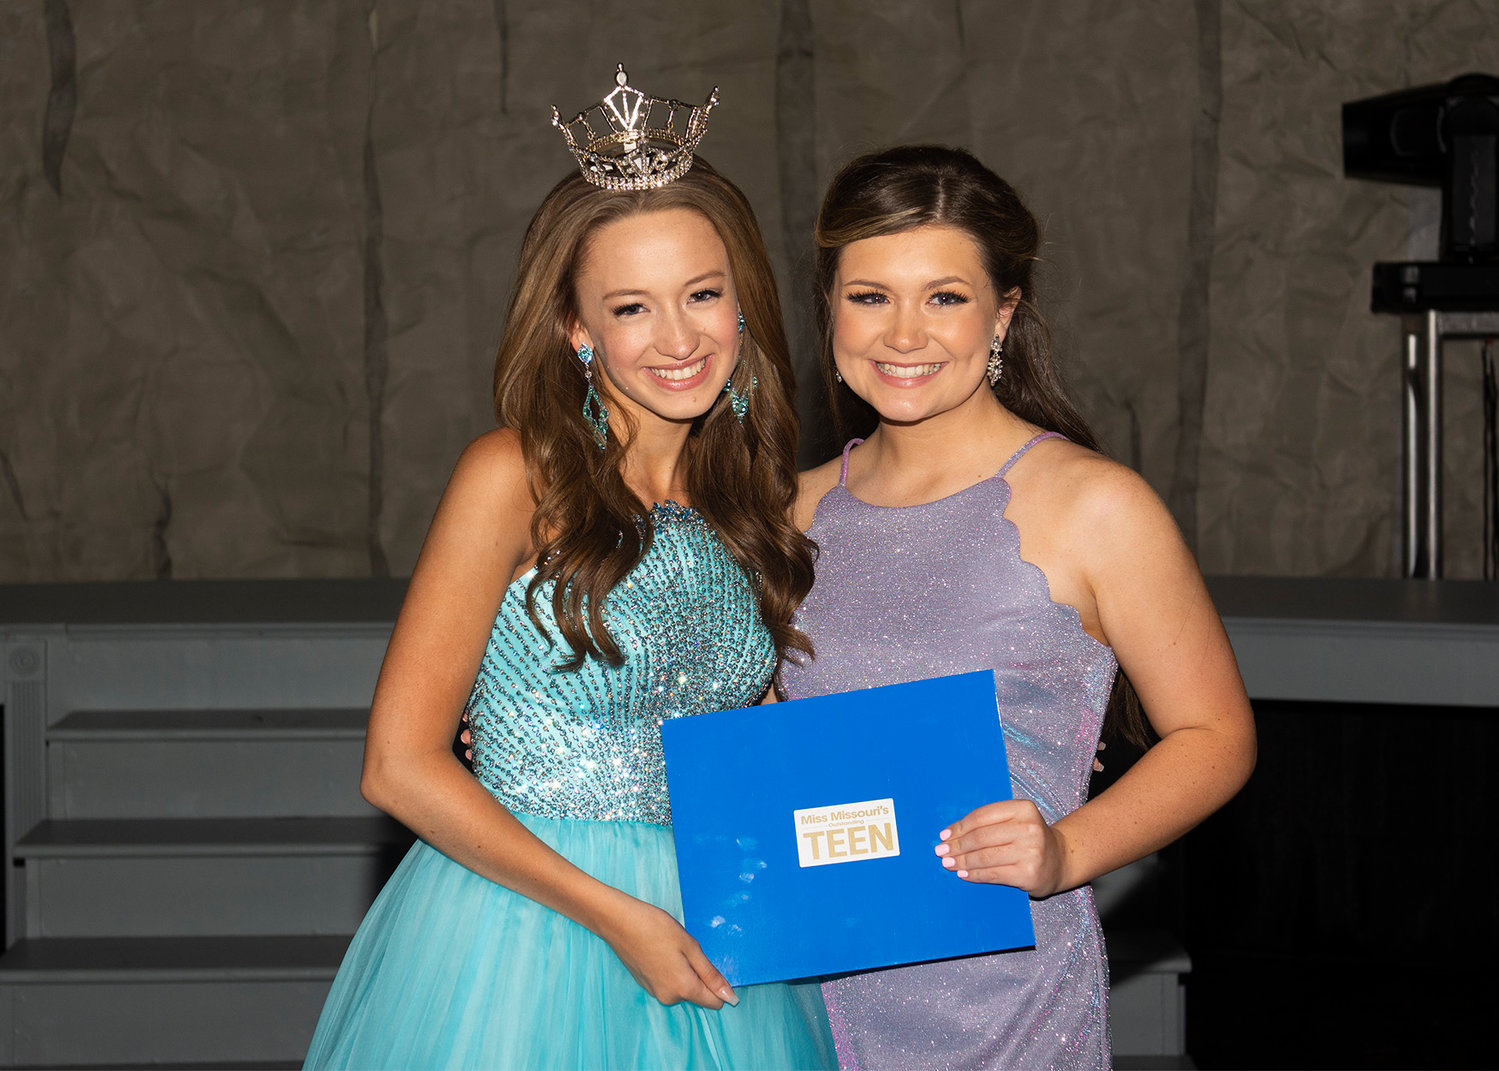 Miss Missouri’s Outstanding Teen 2021 Ashley Berry presents scholarships to Moberly’s Camryn Crist during the Missouri’s Miss Outstanding Teen contest in Mexico.